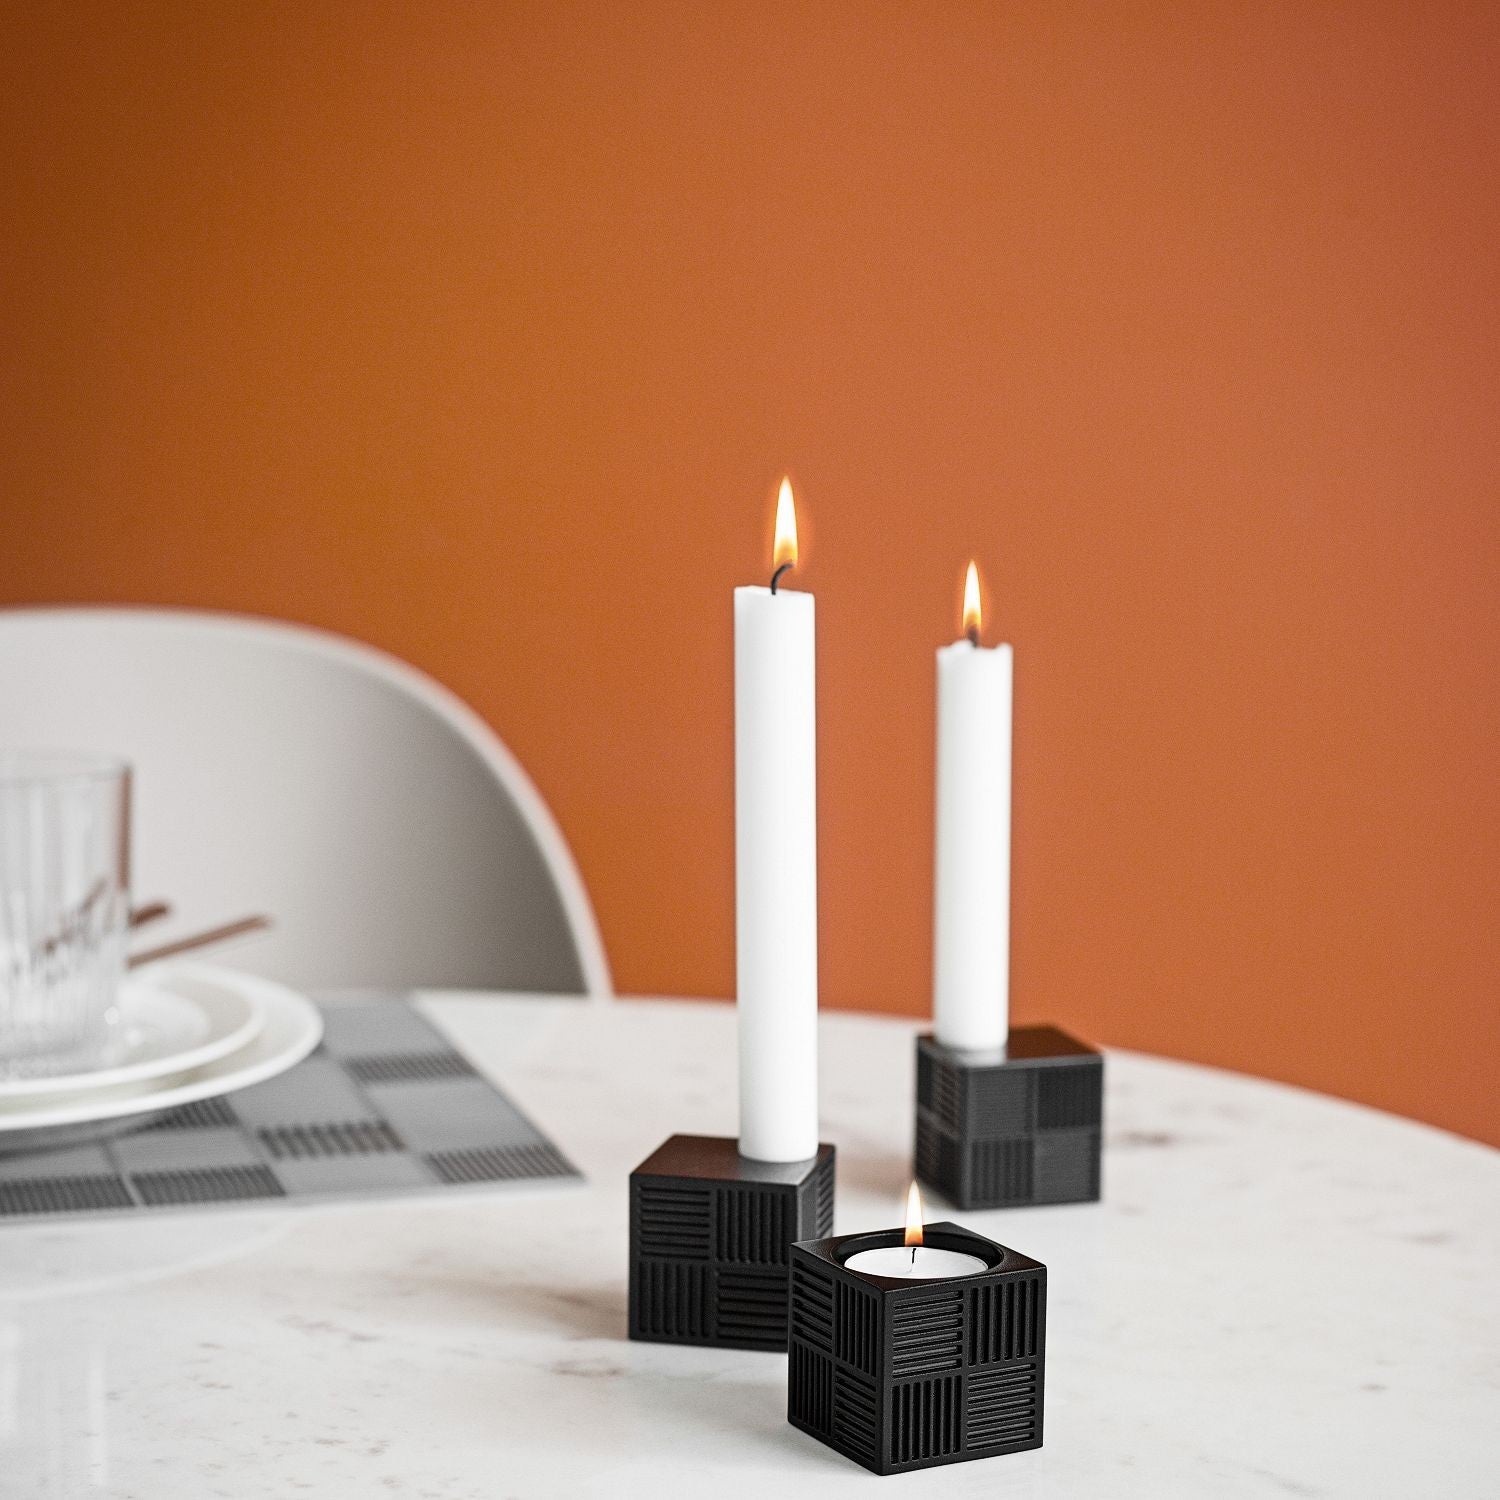 Cube candle holder / tea lights or stand base candles